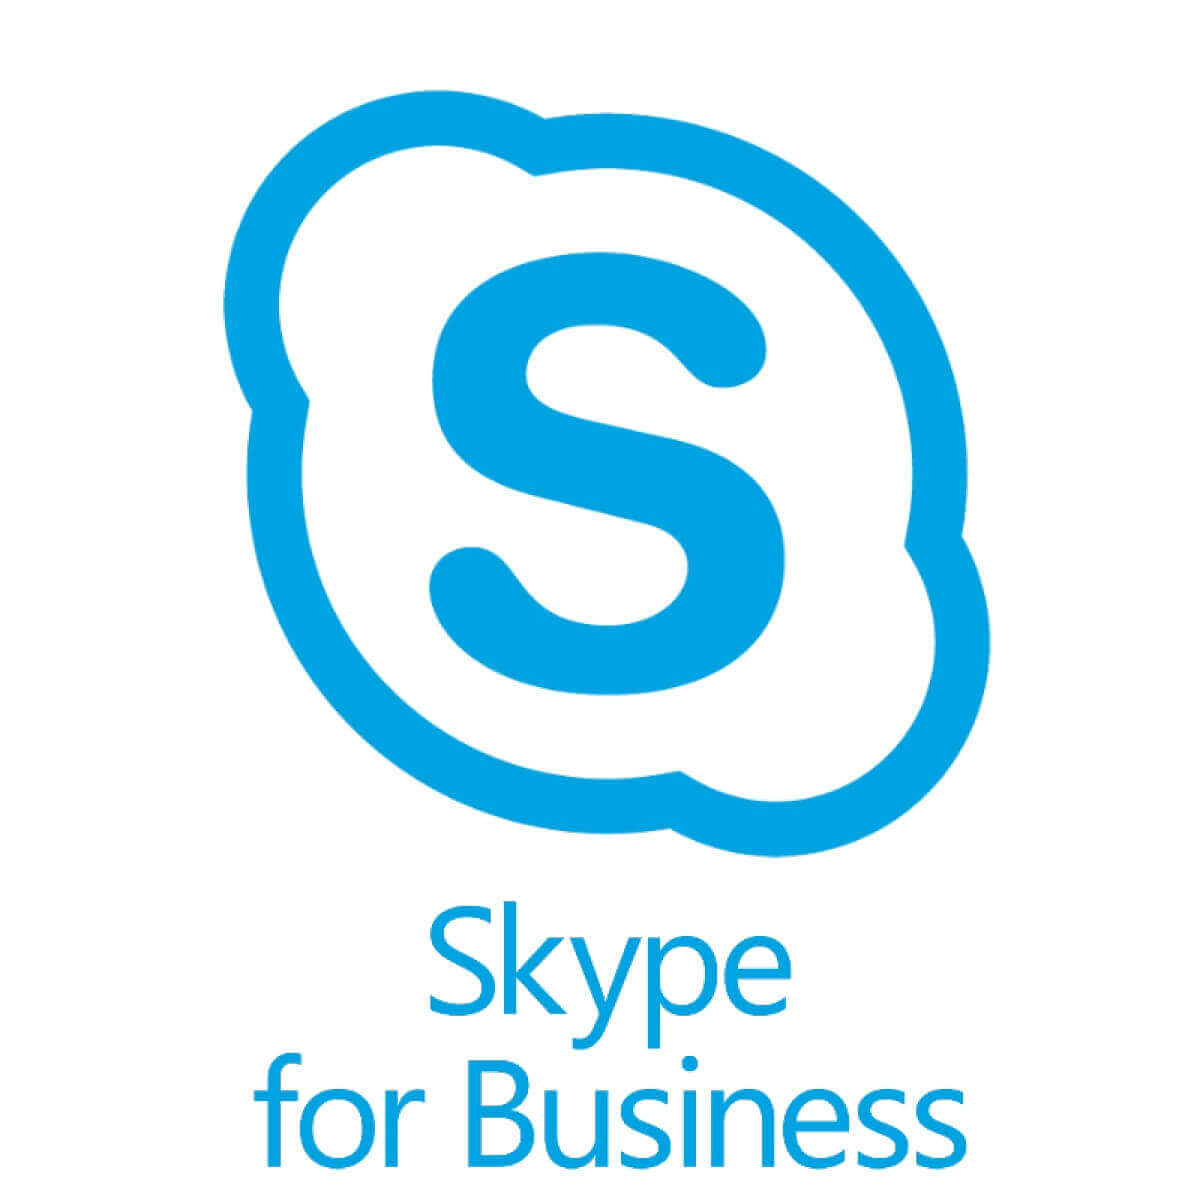 introduced-skype-for-business-harris-black